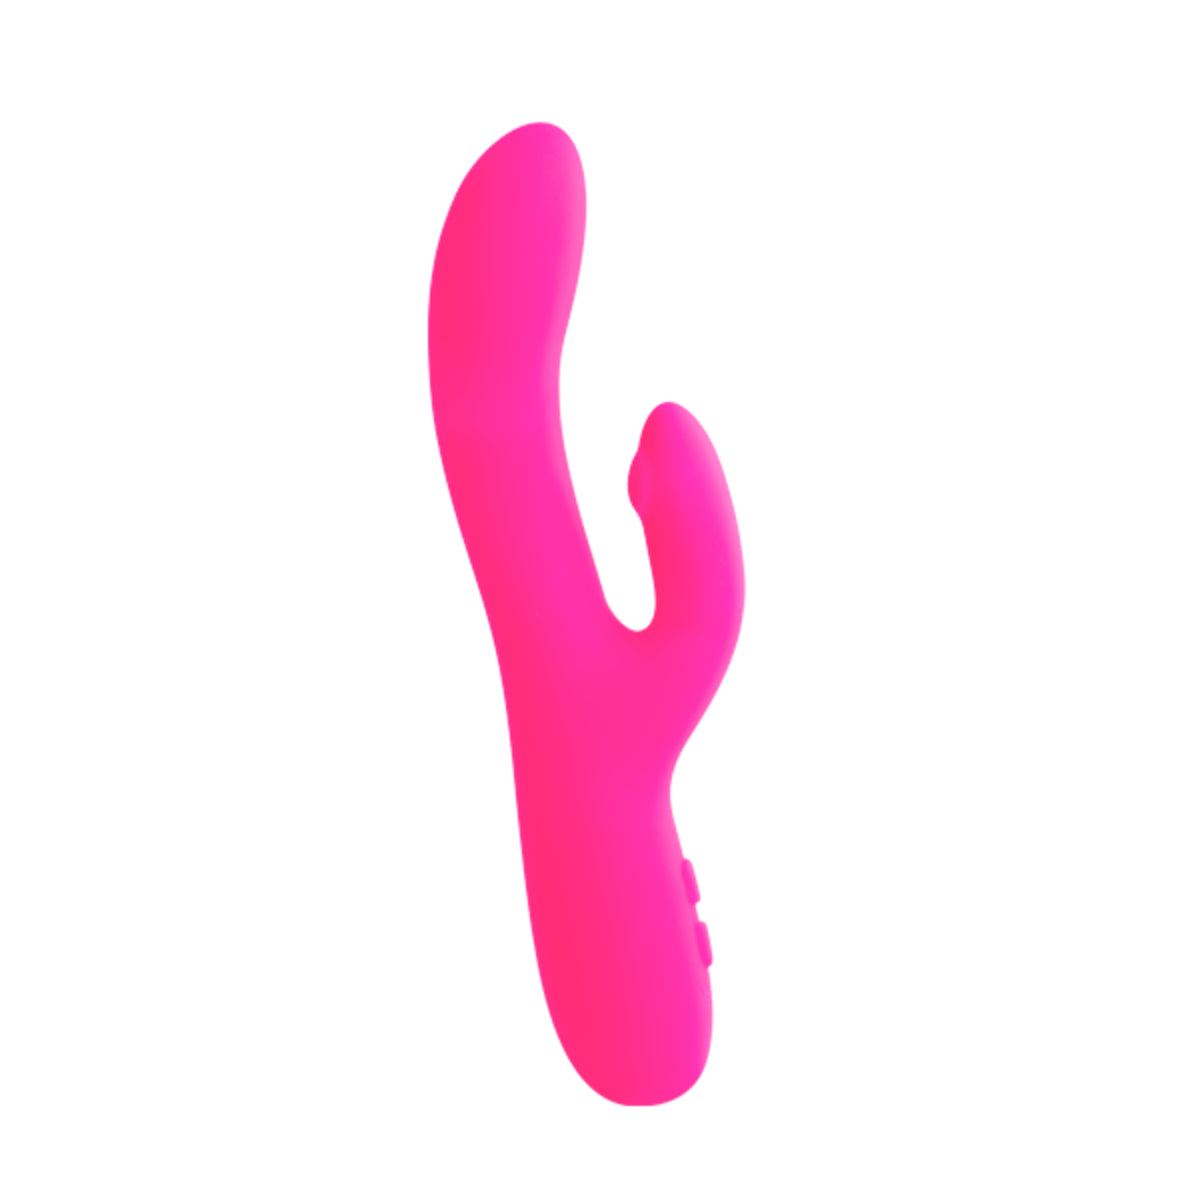 VeDo Rockie is a rabbit style vibrator - working both internally and externally, to give you wonderful stimulation to your G-spot and clitoris at the same time! Multiple sweet spots... multiple pleasure.